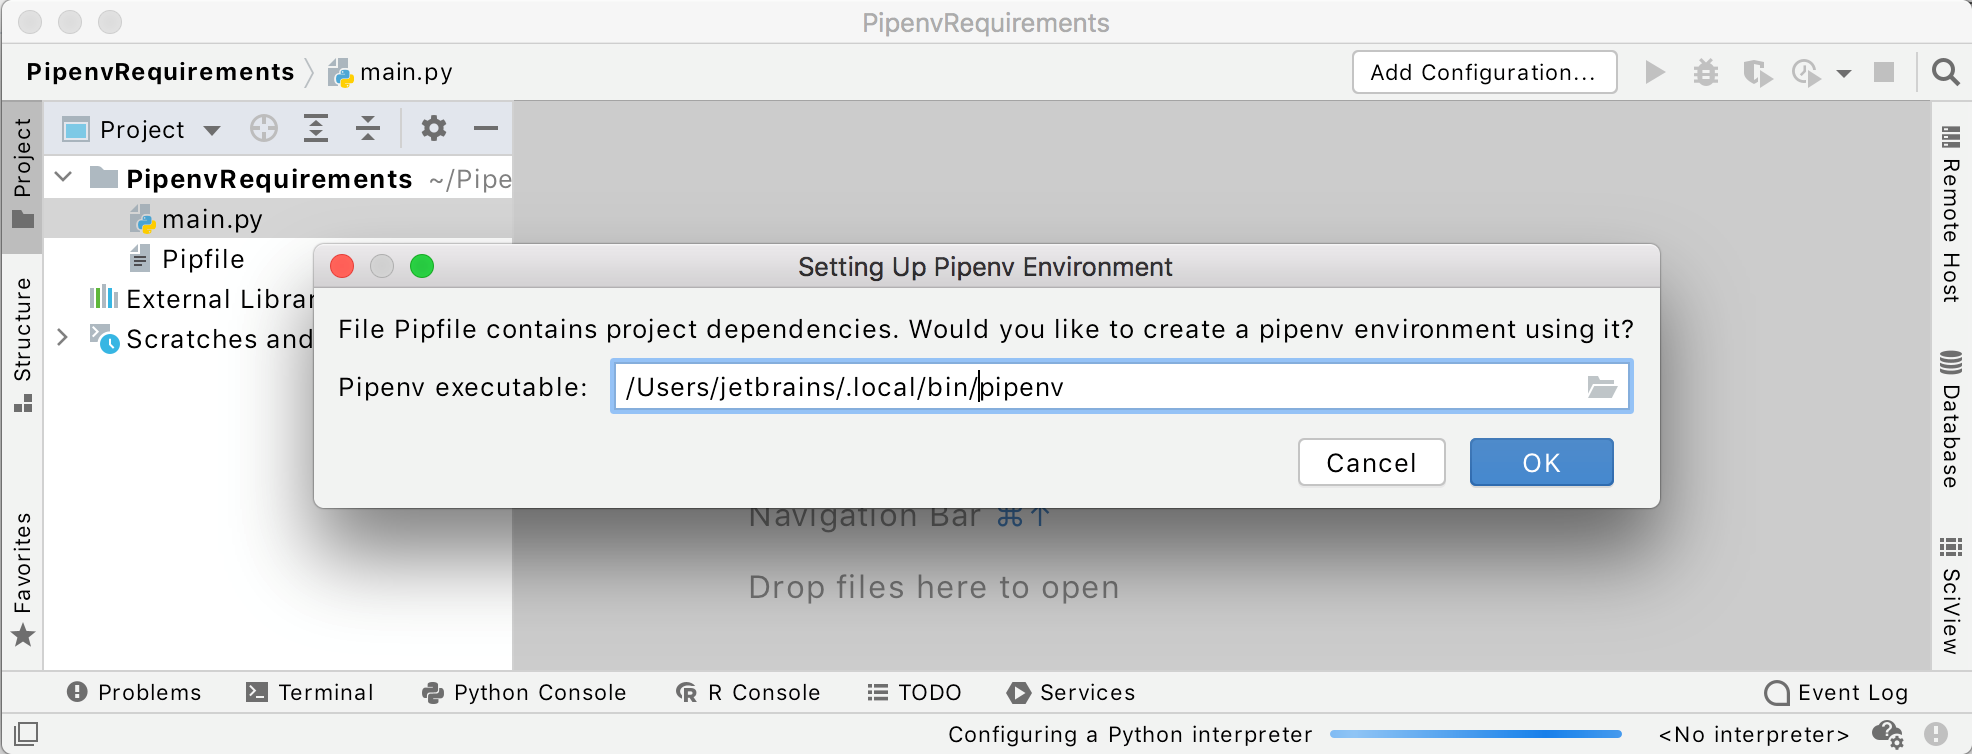 Create a pipenv environment using the requirements.txt file